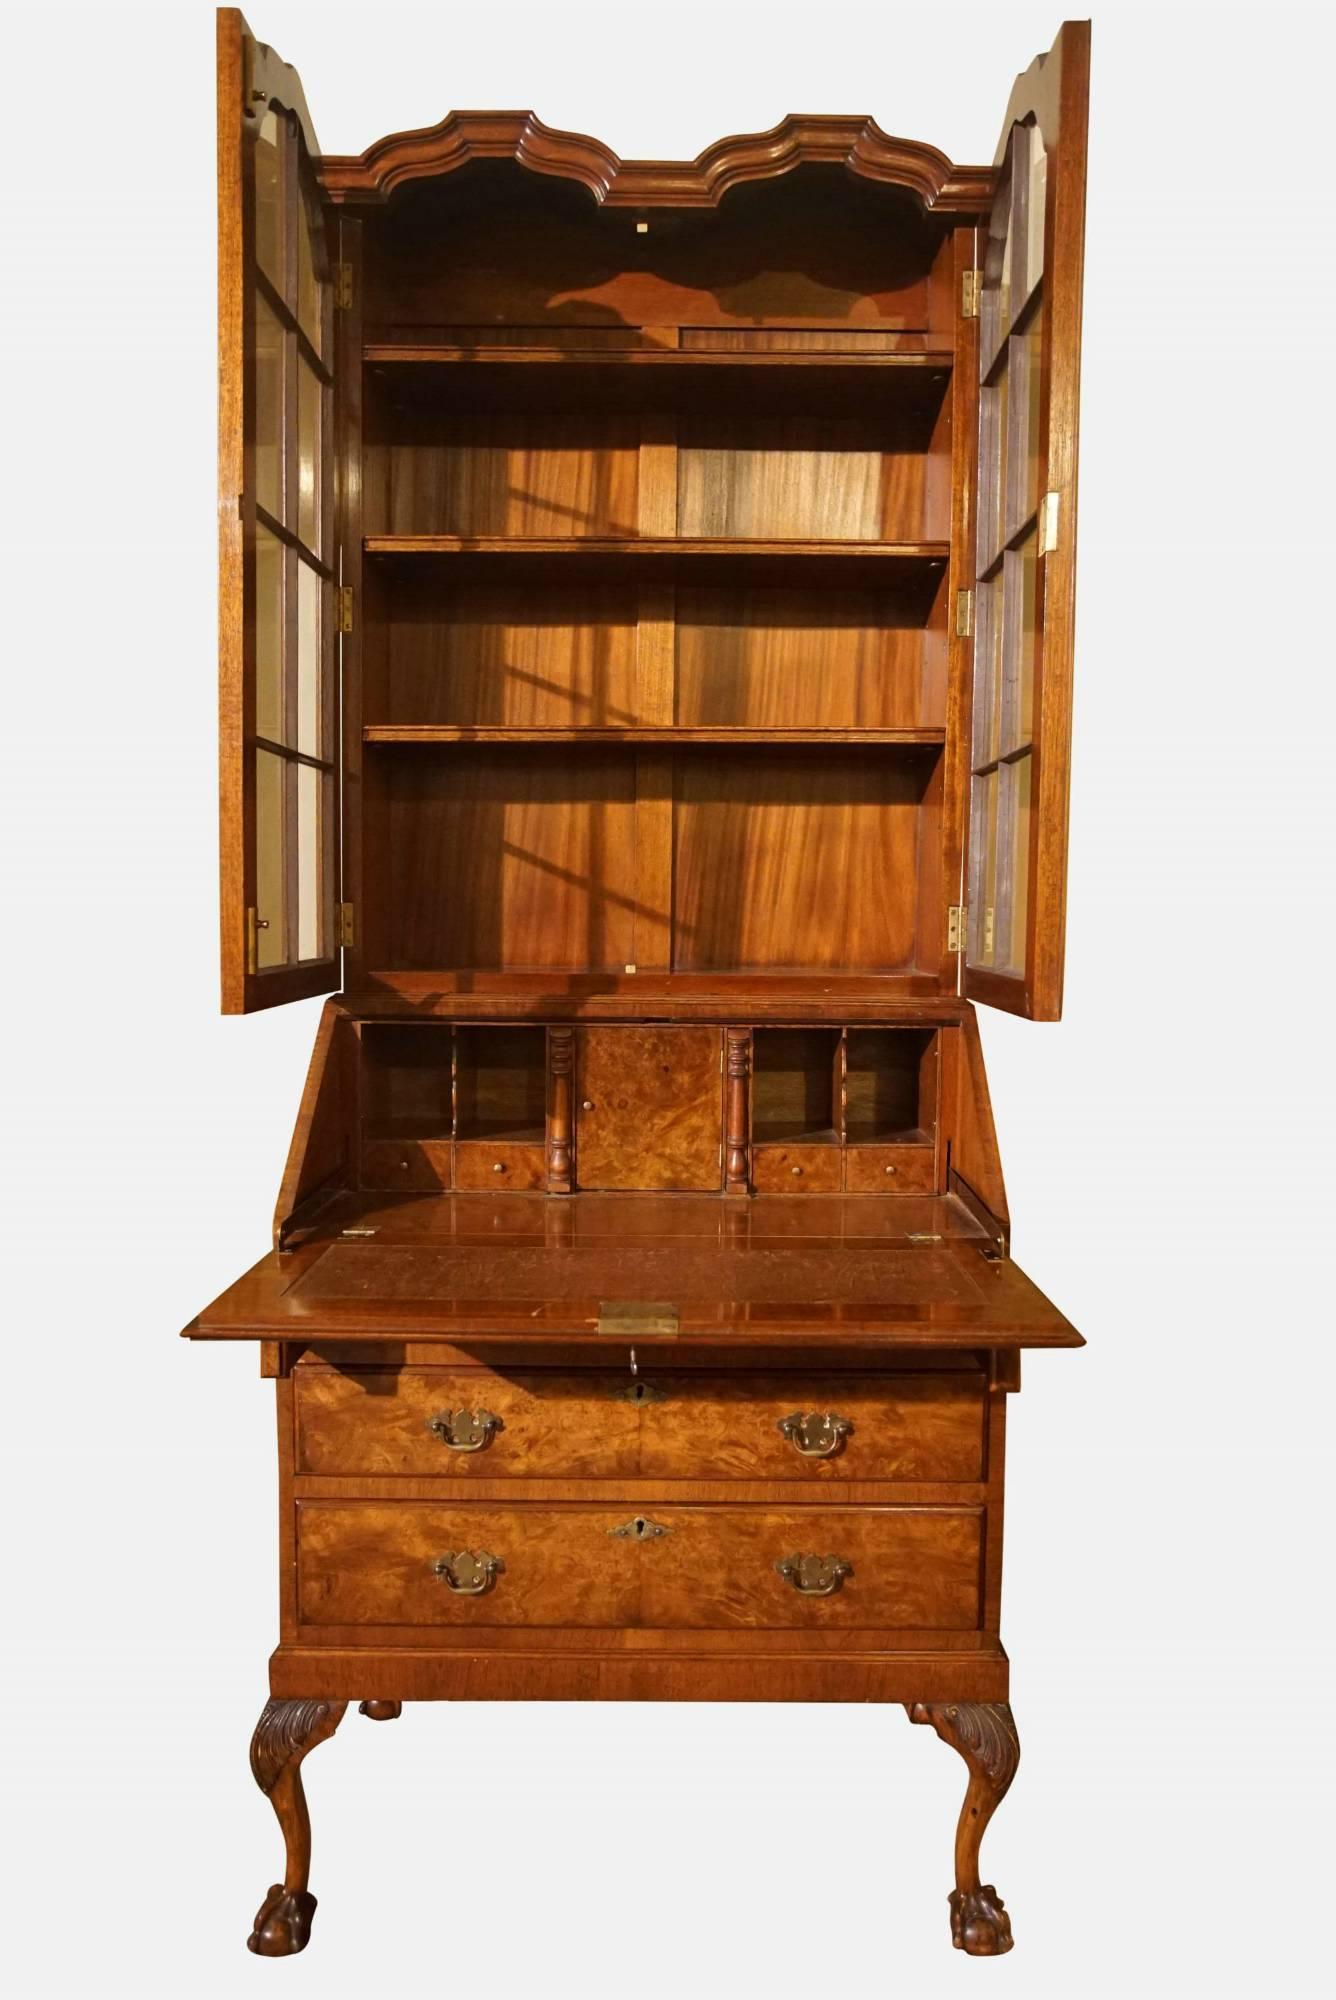 A burr walnut queen anne style double-dome bureau bookcase with full interior standing on cabriole legs and ball and claw feet.

circa 1930.